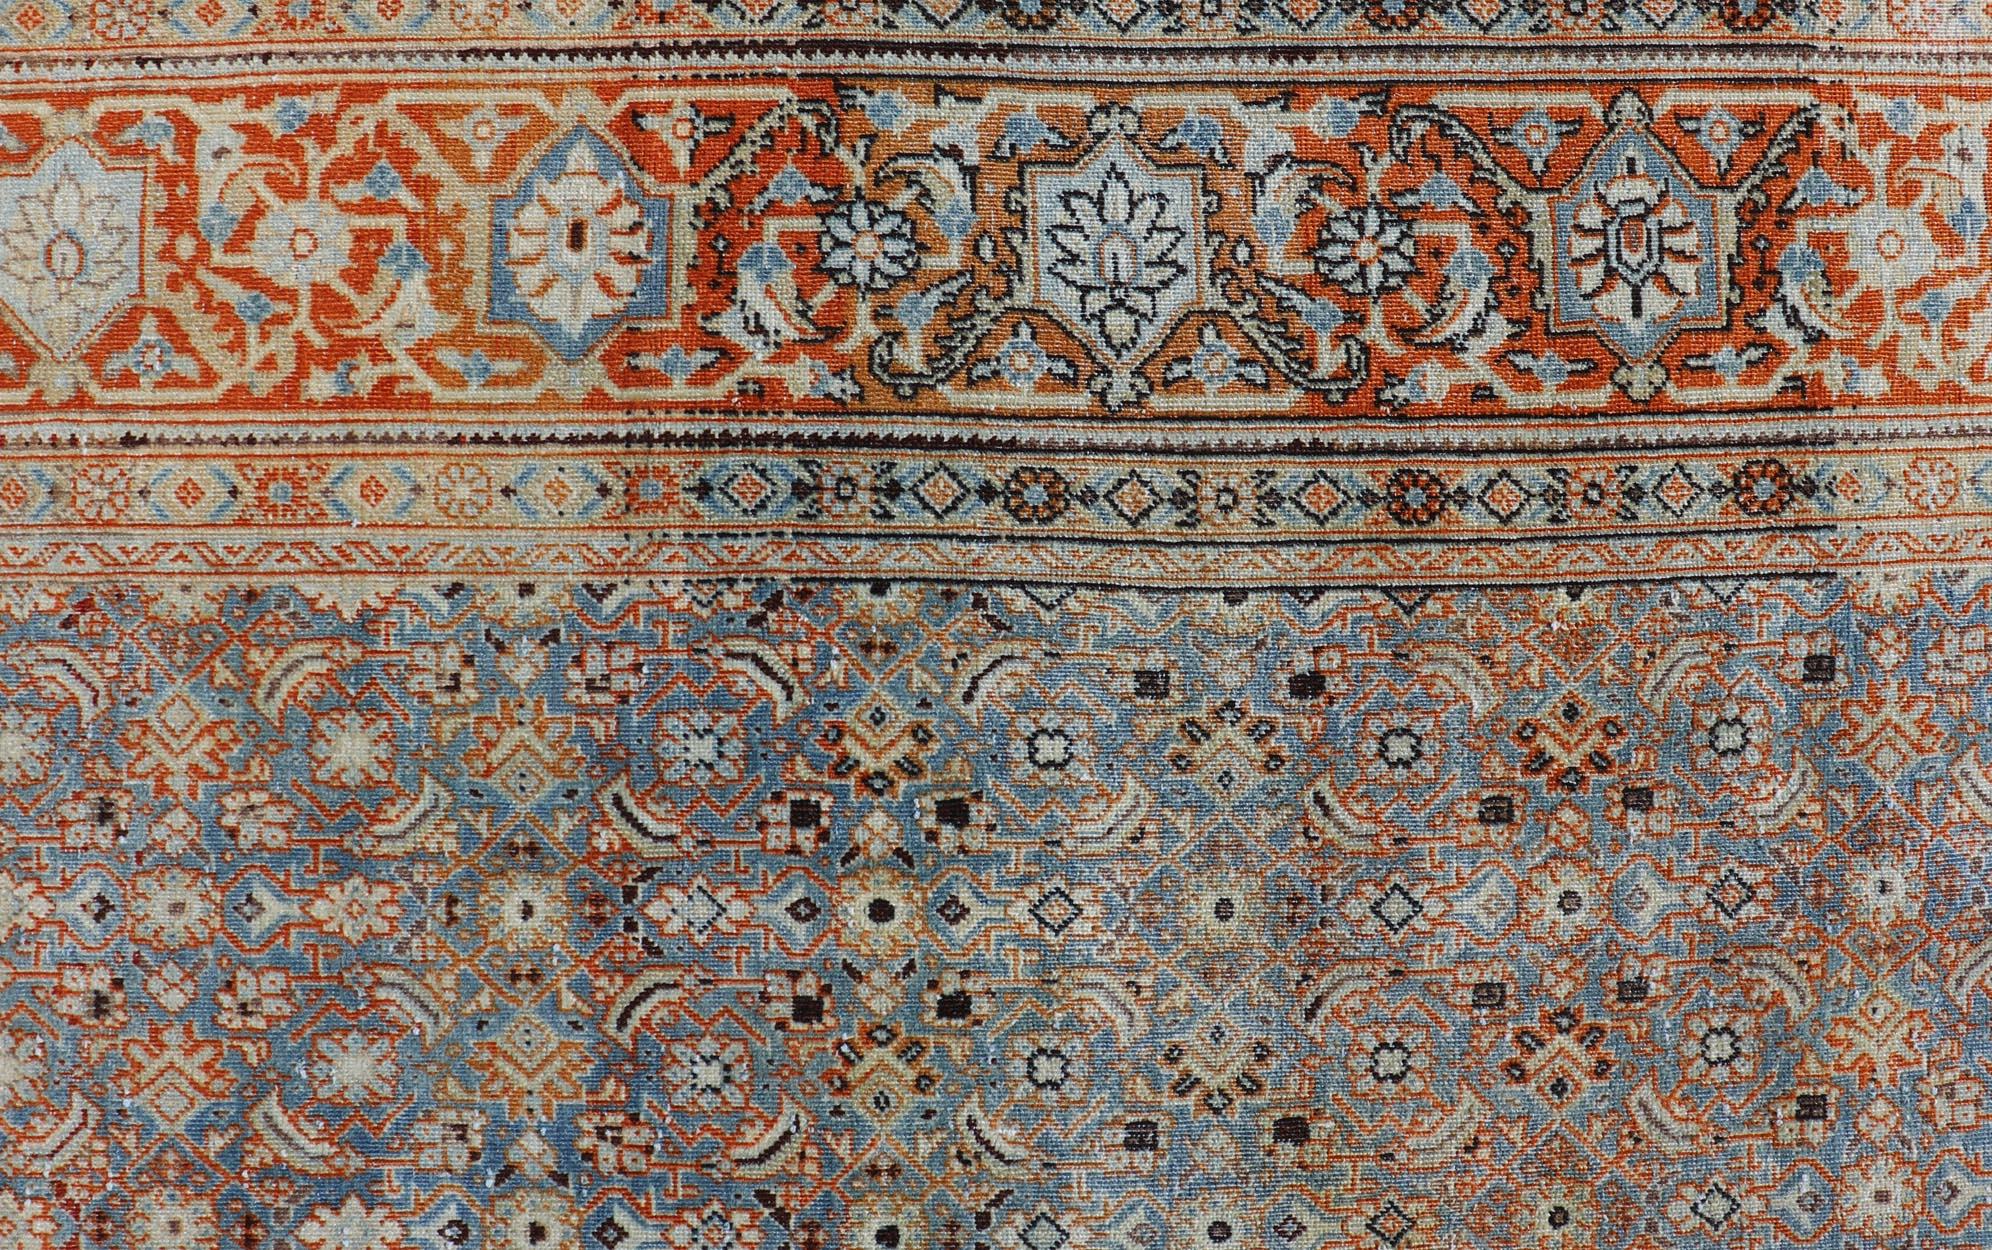 Measures: 7'5 x 11'1 
Antique Persian Tabriz with Sub-Geometric Herati Design in Orange and Blue. Keivan Woven Arts/rug TU-MTU-15161, country of origin / type: Persian / Tabriz, circa 1910s.
This antique Persian Tabriz rug features an all-over,